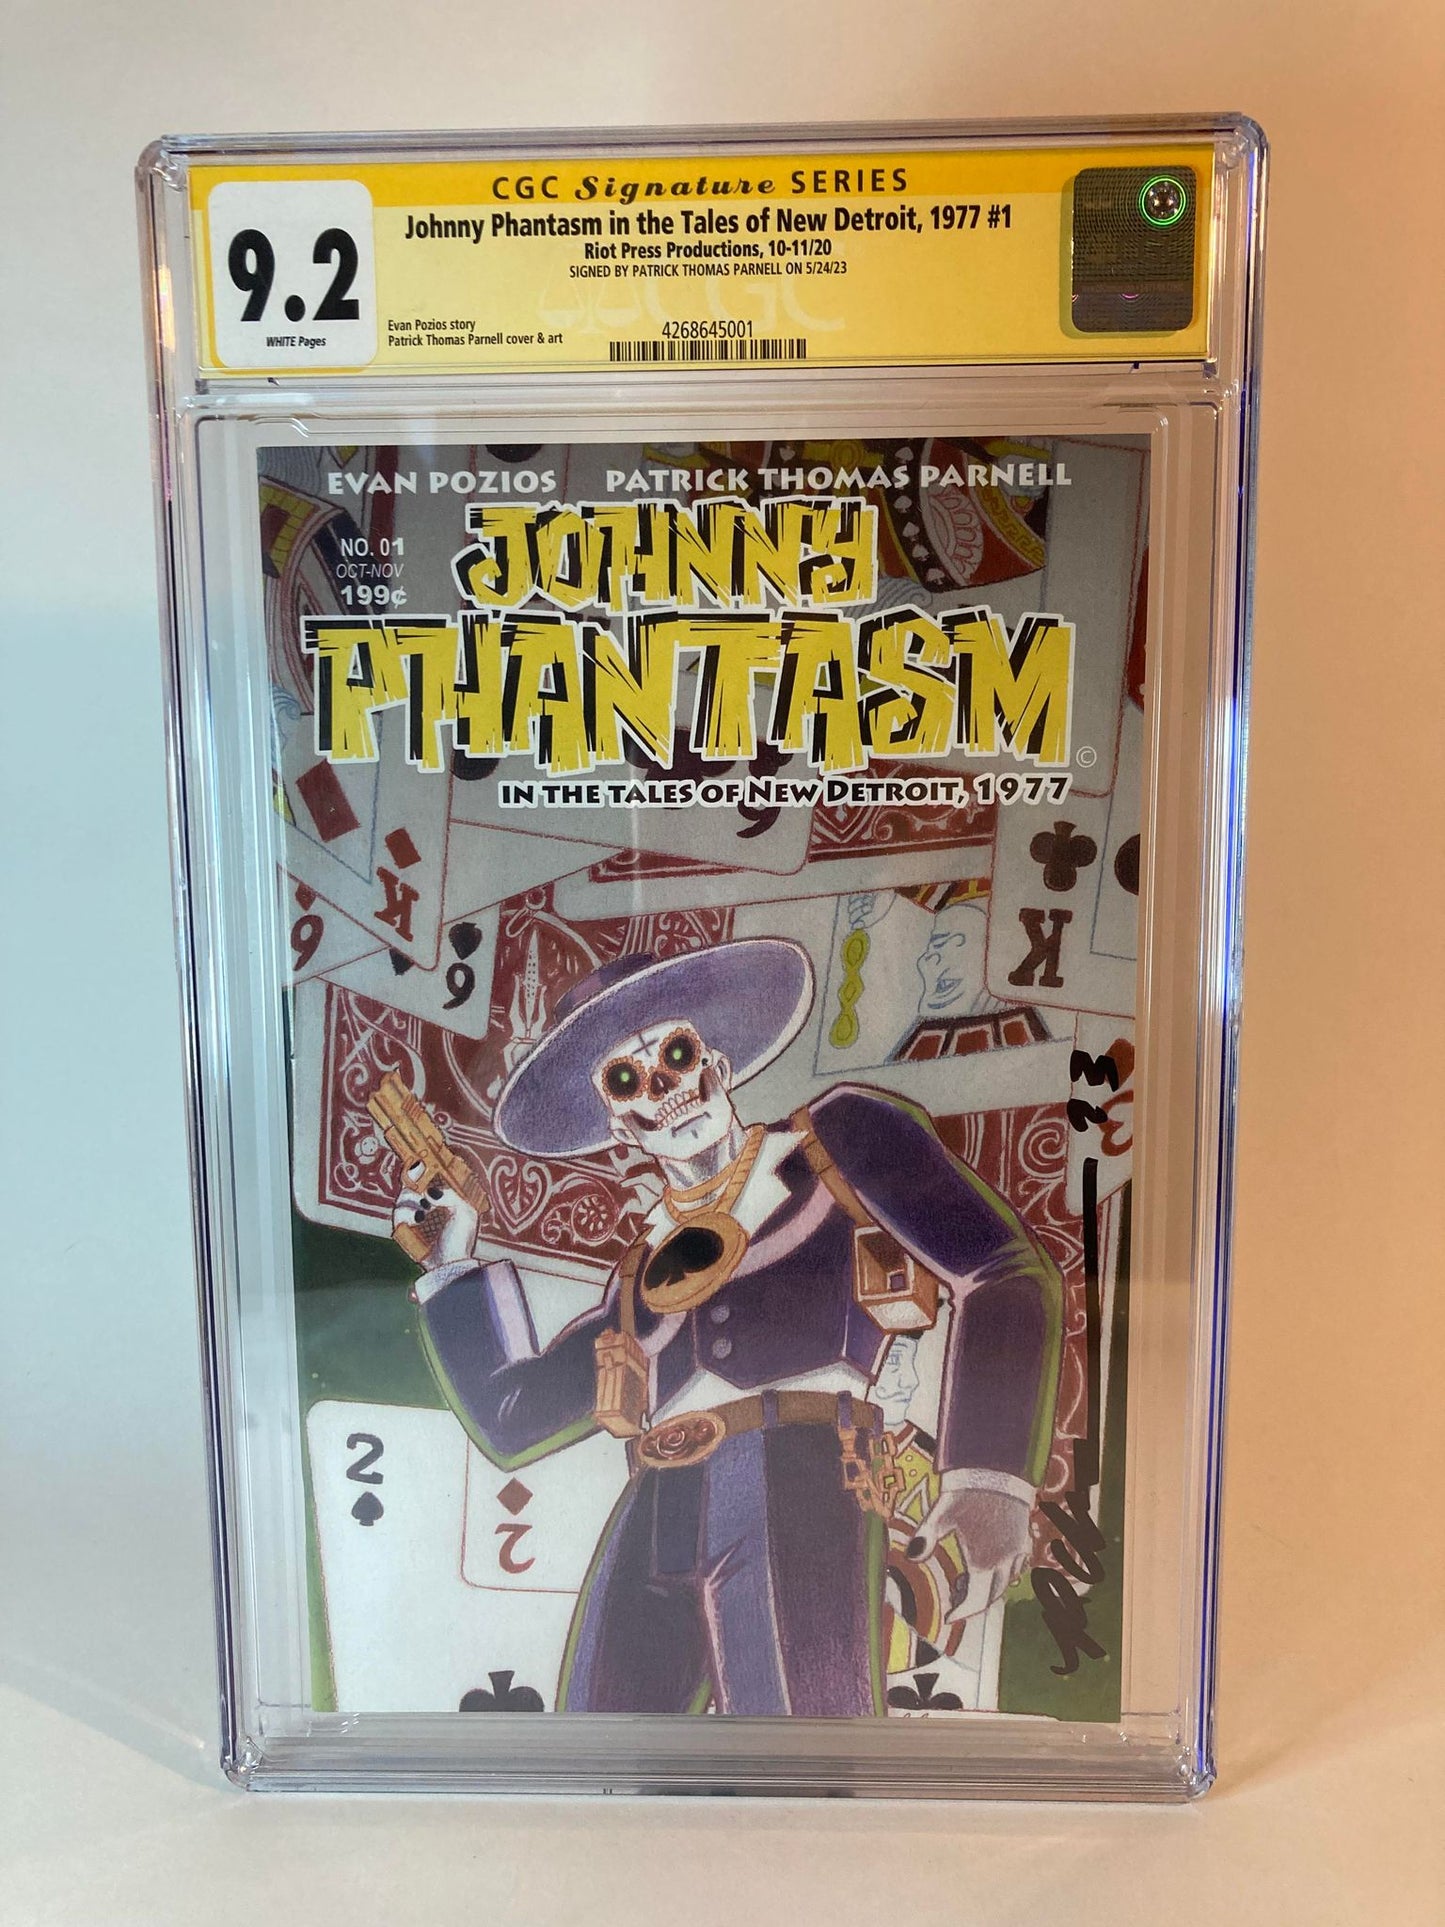 Johnny Phantasm 1977 1-3 CGC graded and signed by PTP!